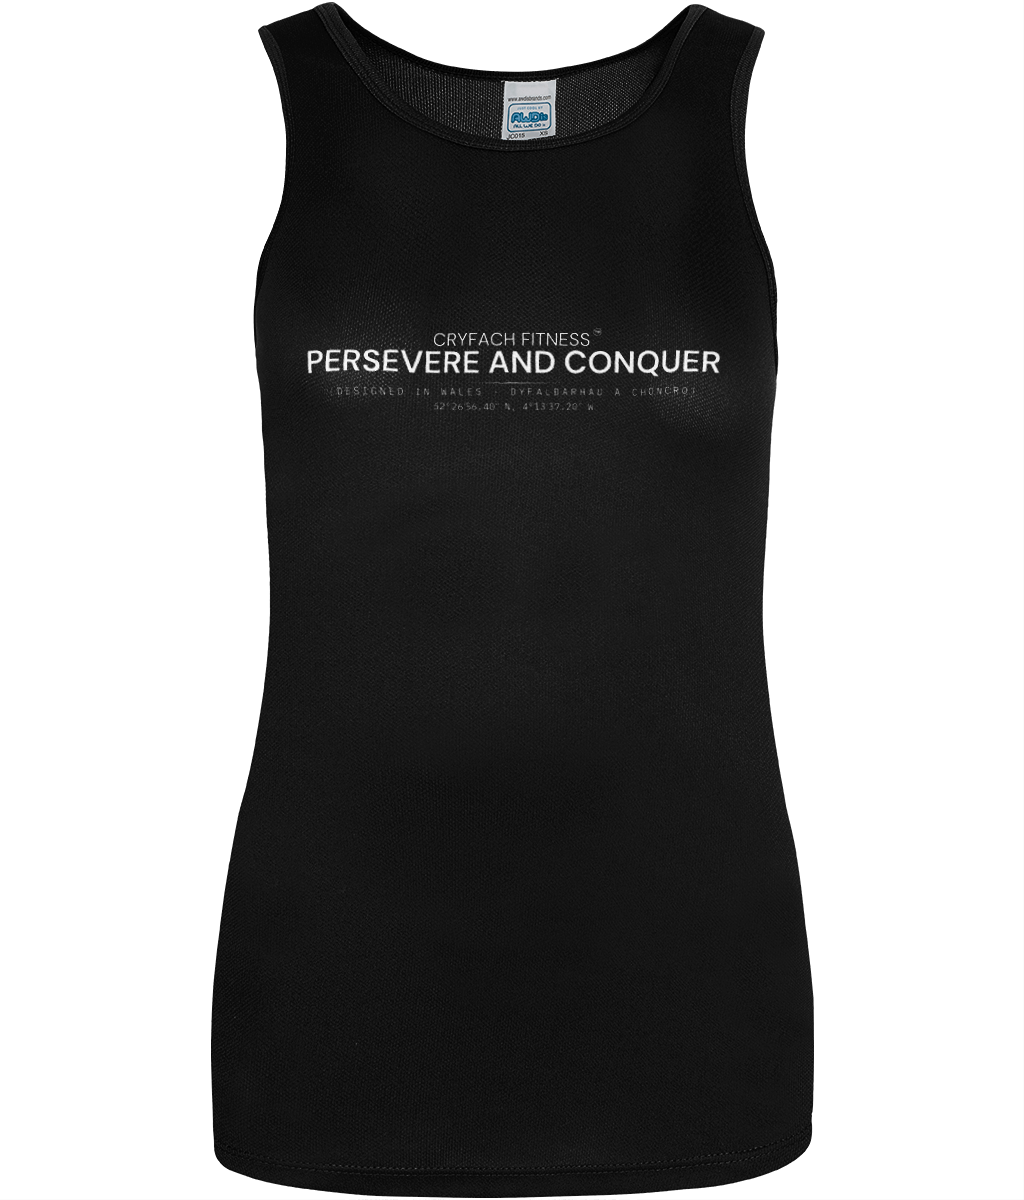 Persevere And Conquer Women's Breathable Vest